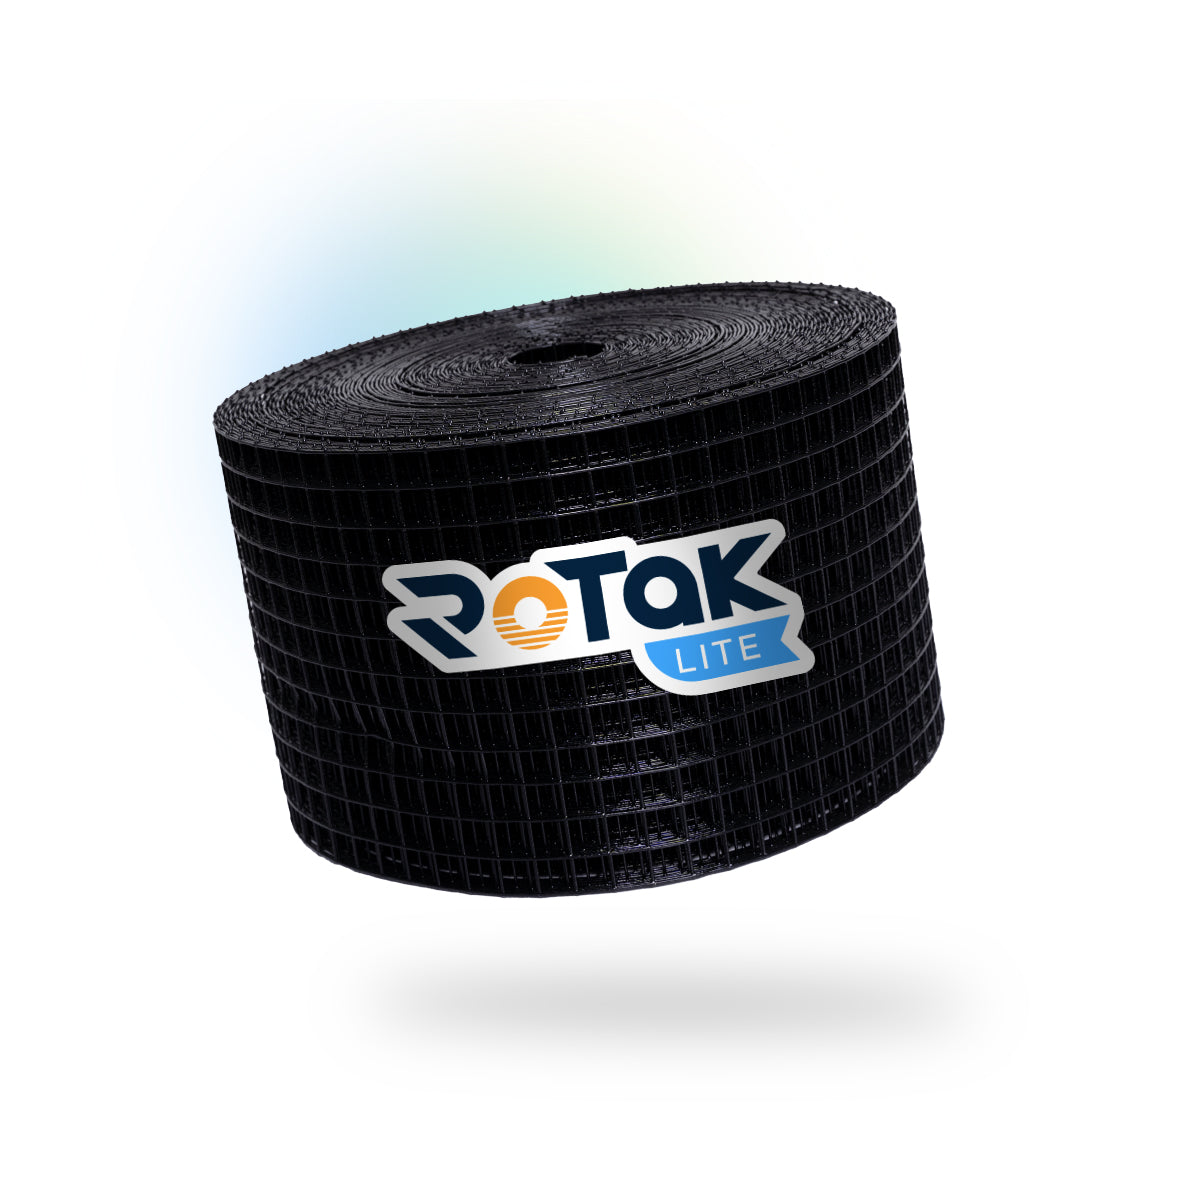 ROTAK Critter Guard LITE | 6in x 100ft Solar Panel Bird Prevention Roll | Galvanized Black PVC Coated ½ inch Wire Roll Mesh